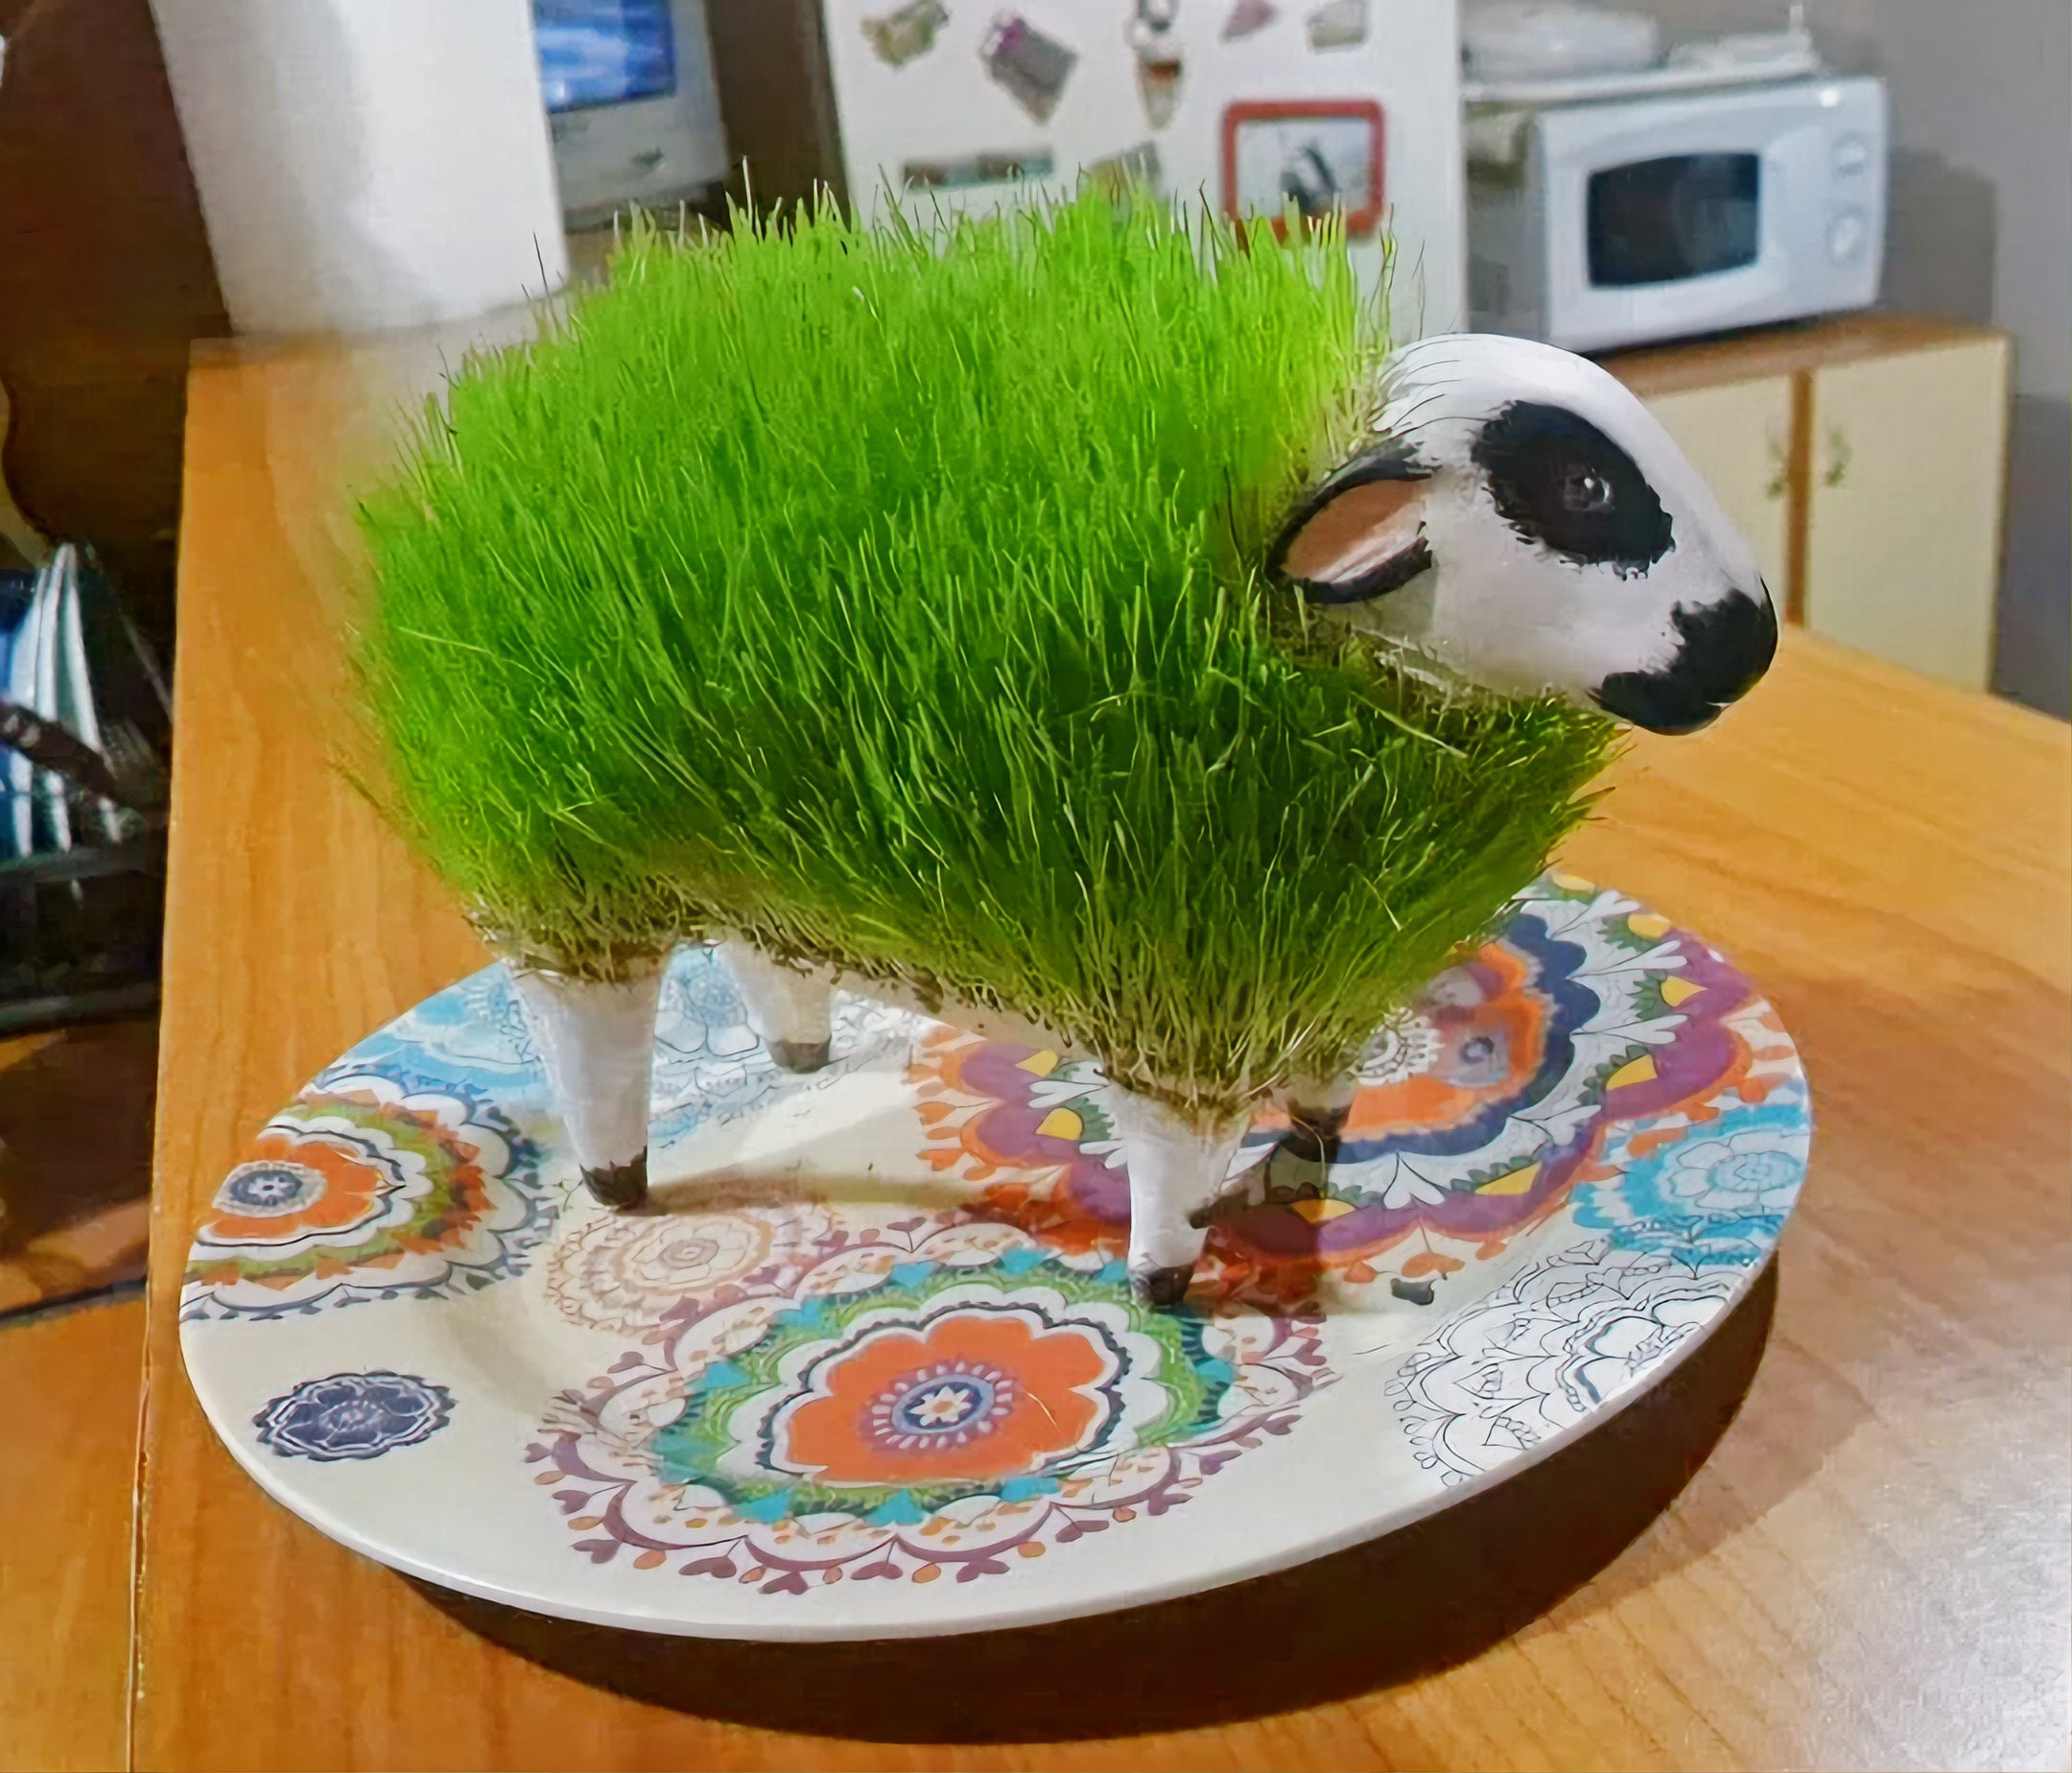 Growing Grass In A Cup - Little Bins for Little Hands